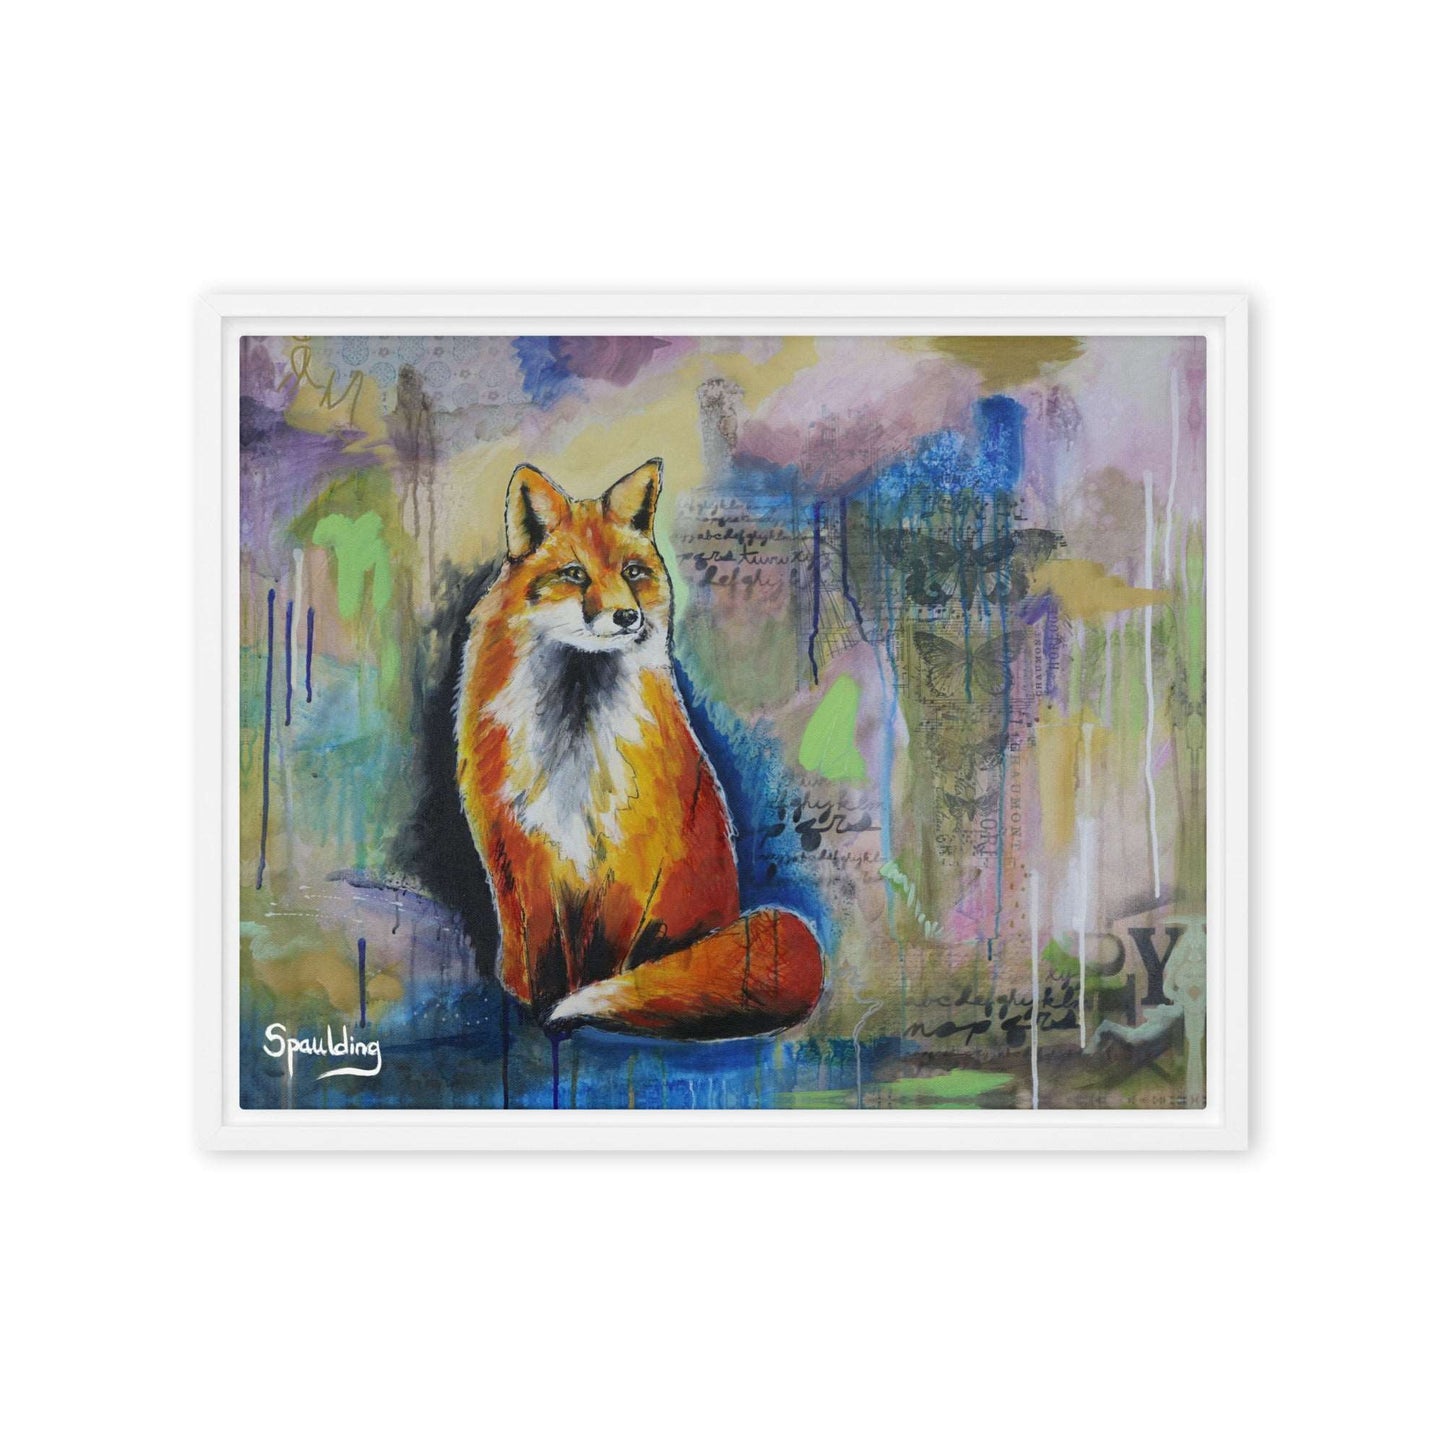 A framed canvas print of a red fox with a bushy tail sitting on a wall, surrounded by blue, green, and pink colors.